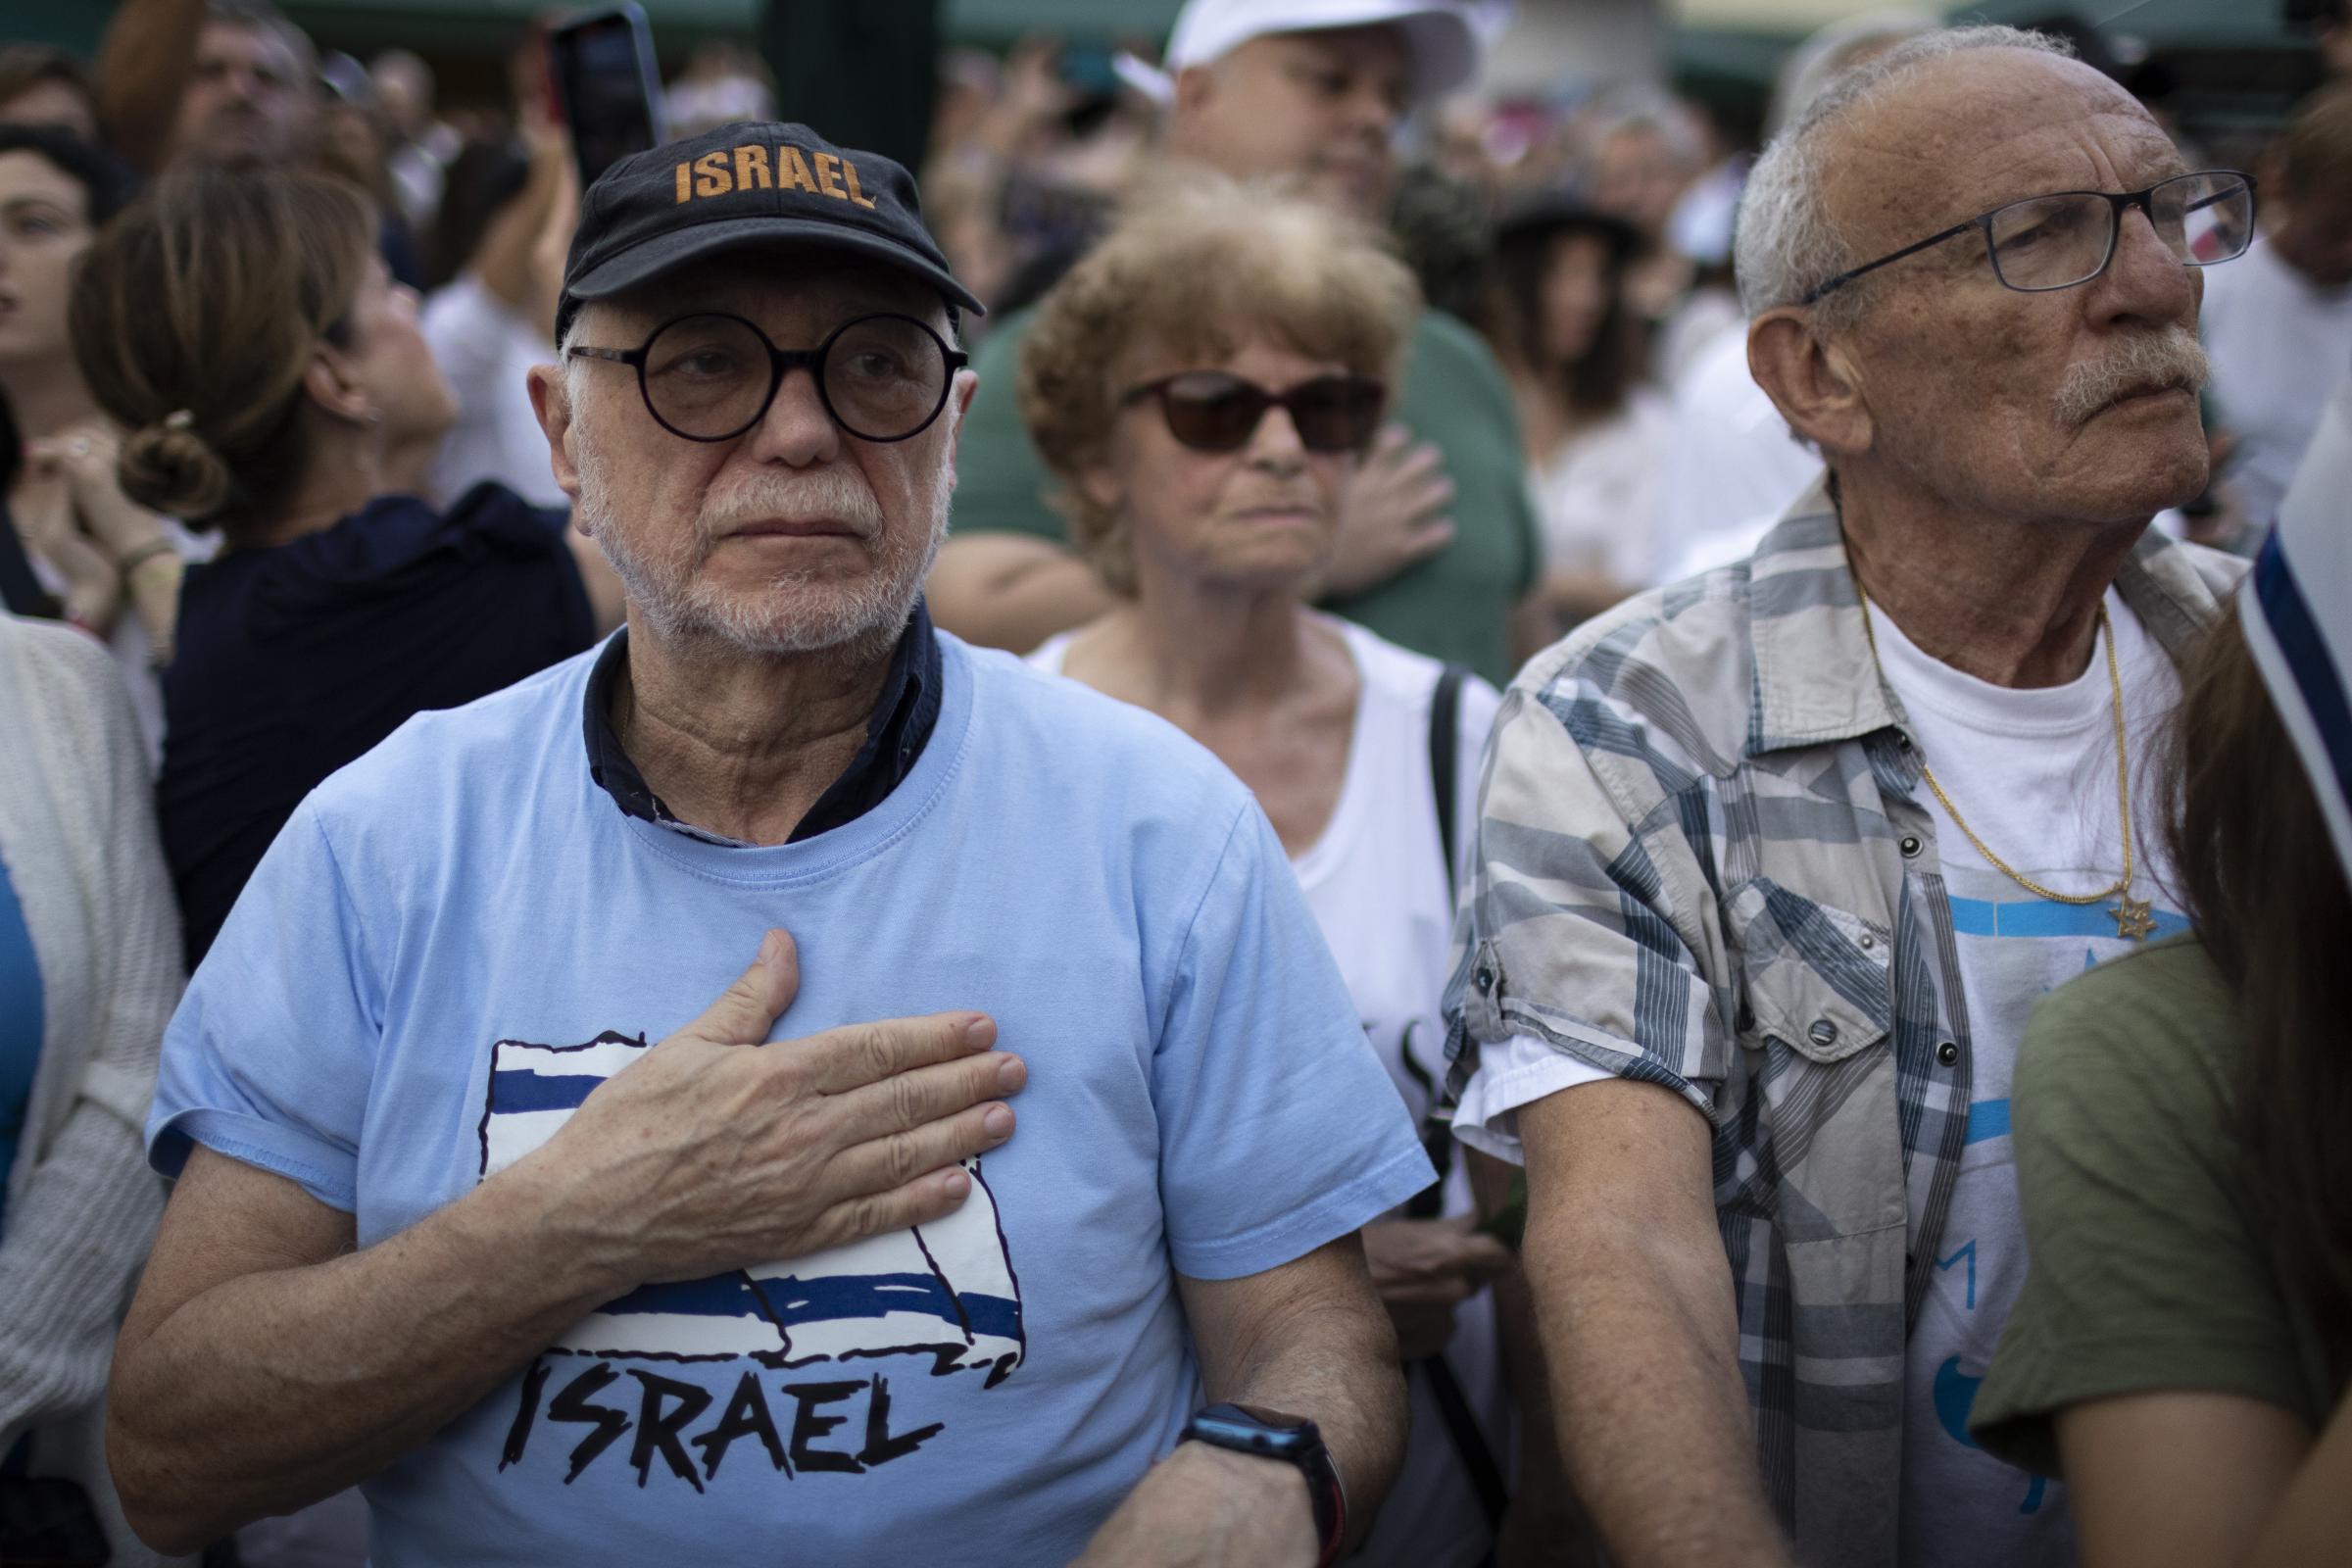 People attend a gathering in support of Israel in Aventura, Florida, on October 9, 2023. Marco BELLO Aventura United States